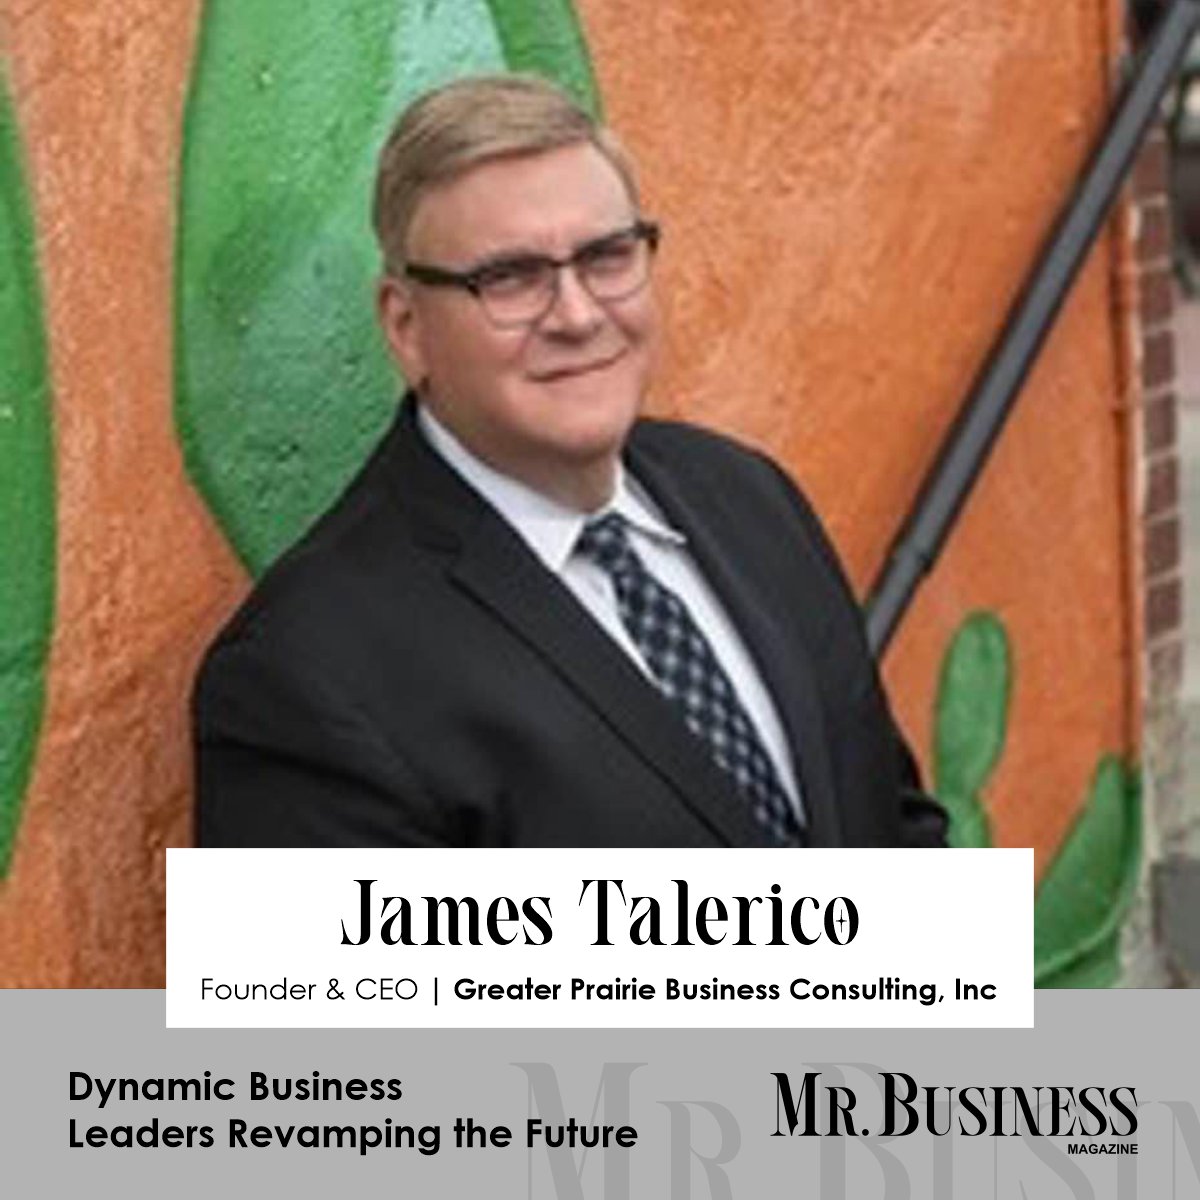 James Talerico – Providing A Blueprint For Maximizing The Future Performance Of Your Business